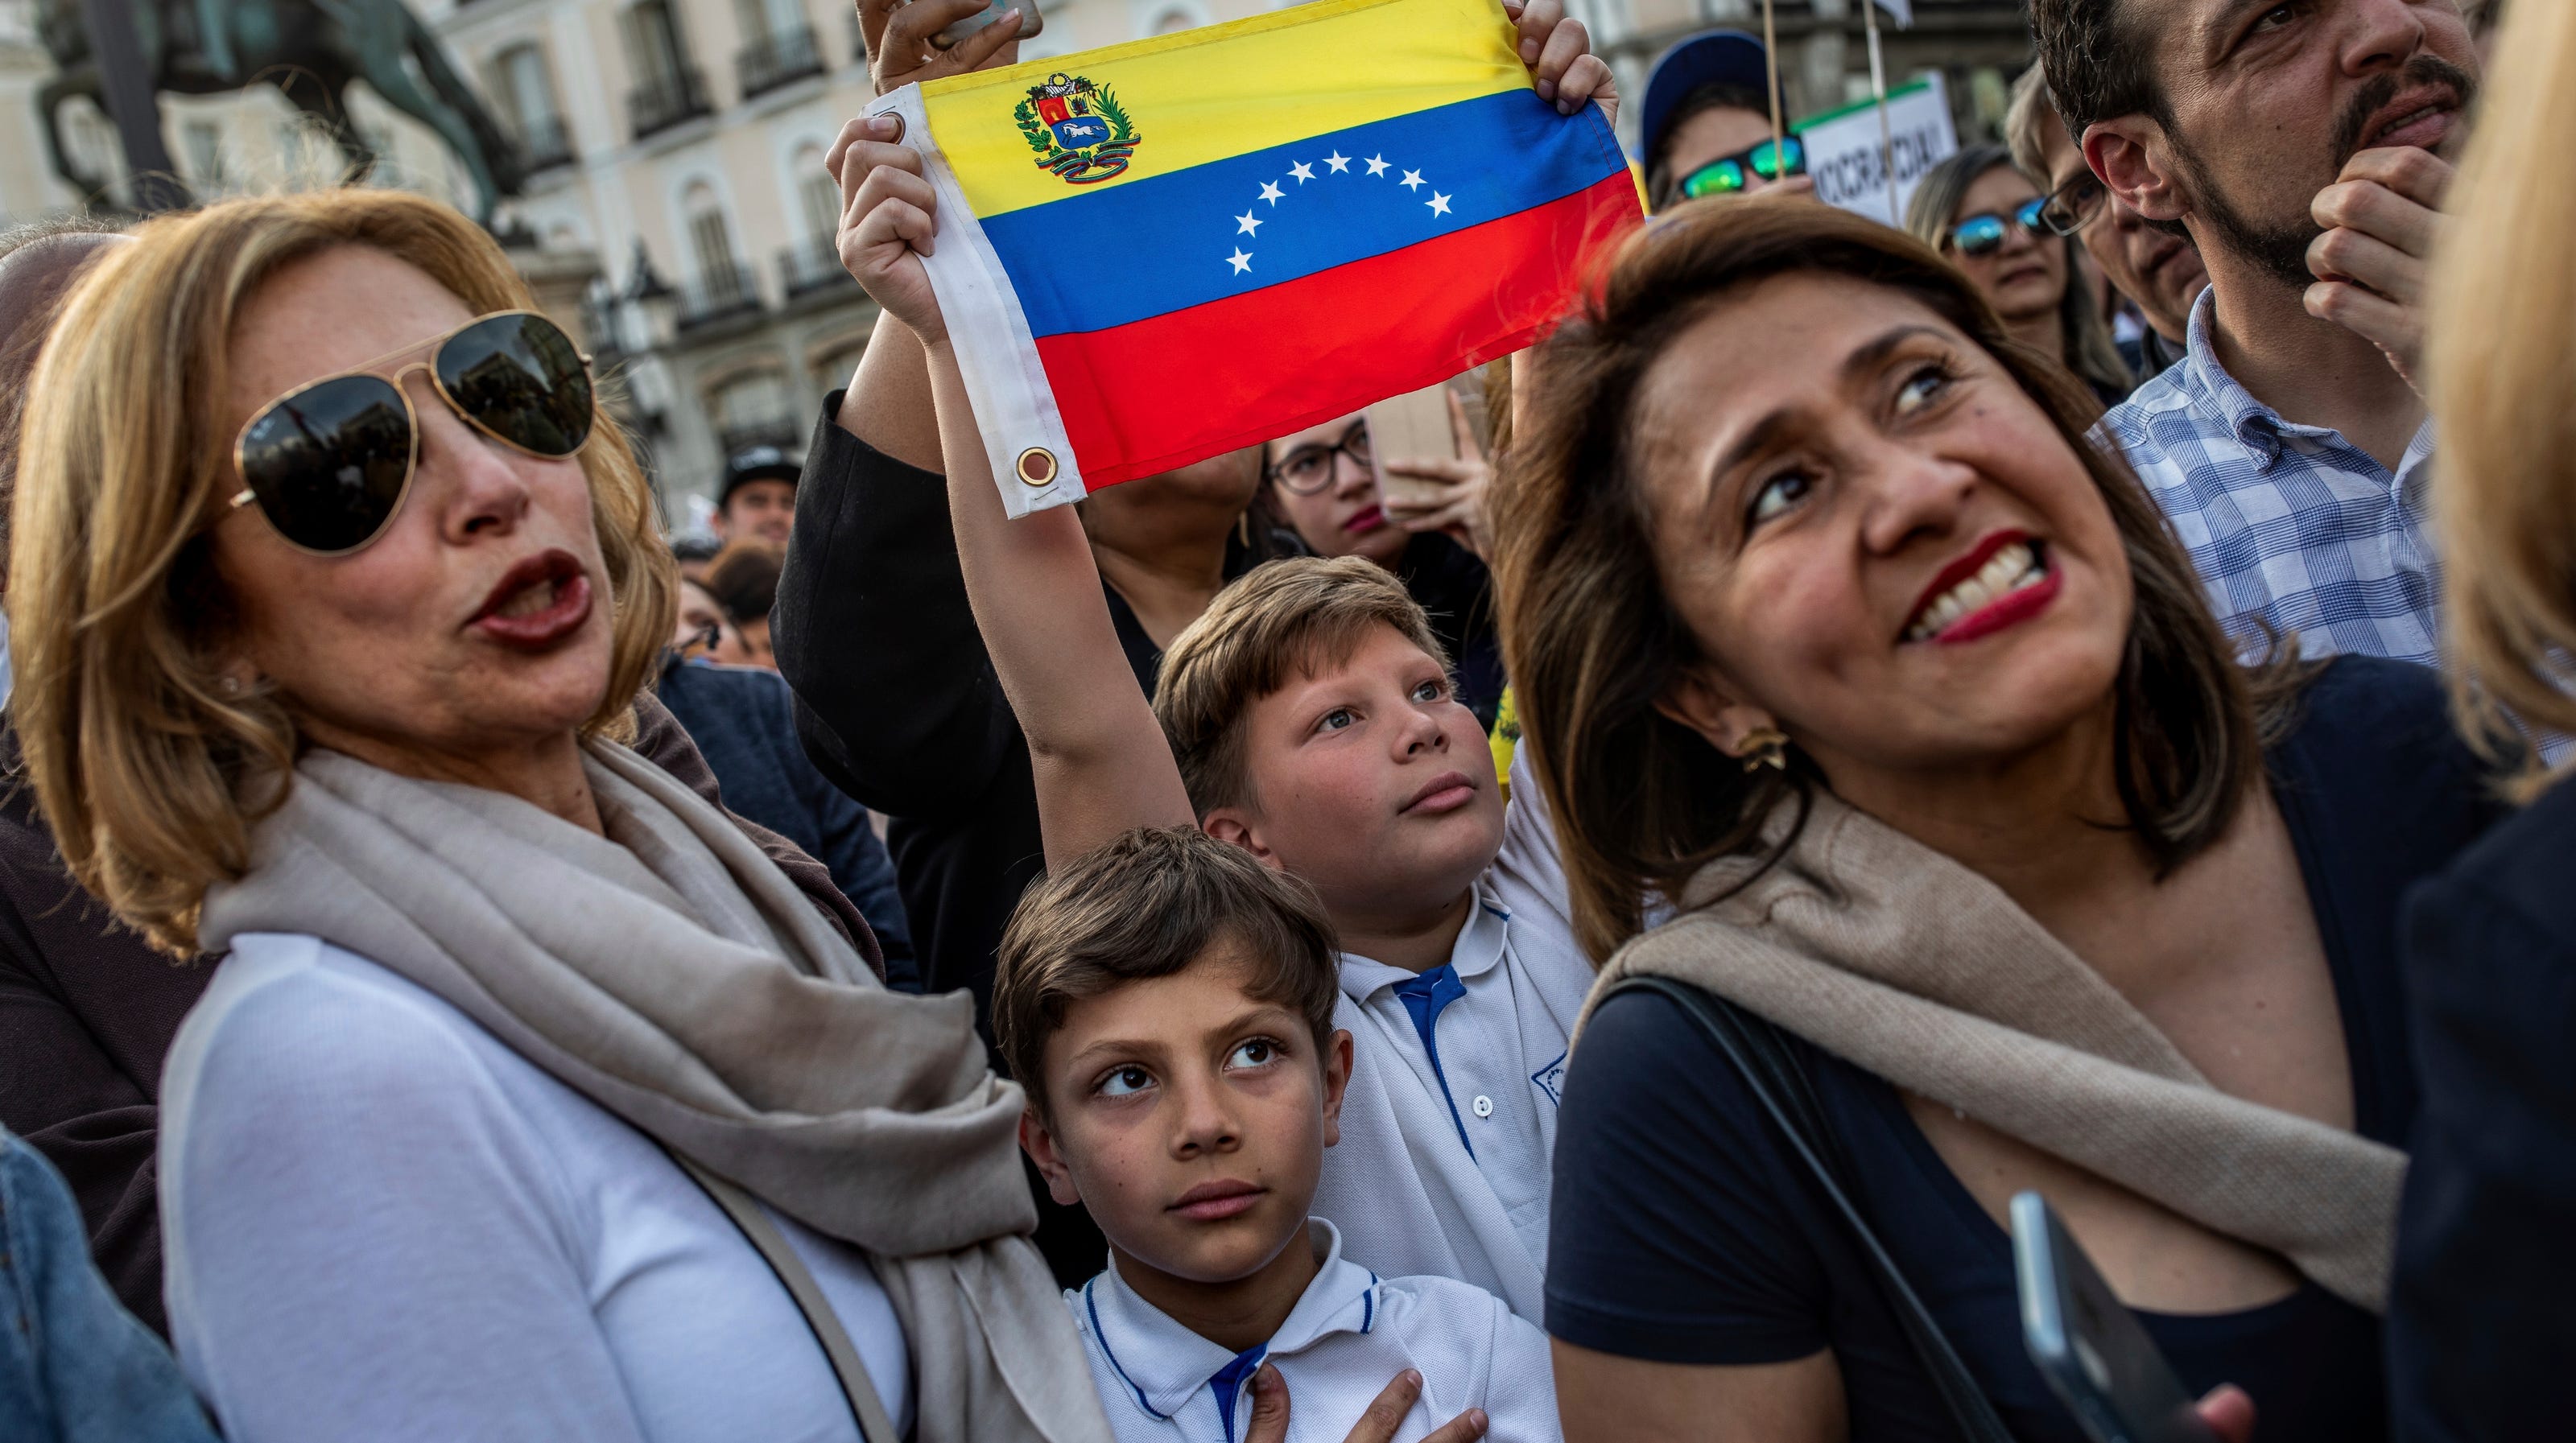 European Union calls for 'free and fair elections' to end standoff in Venezuela